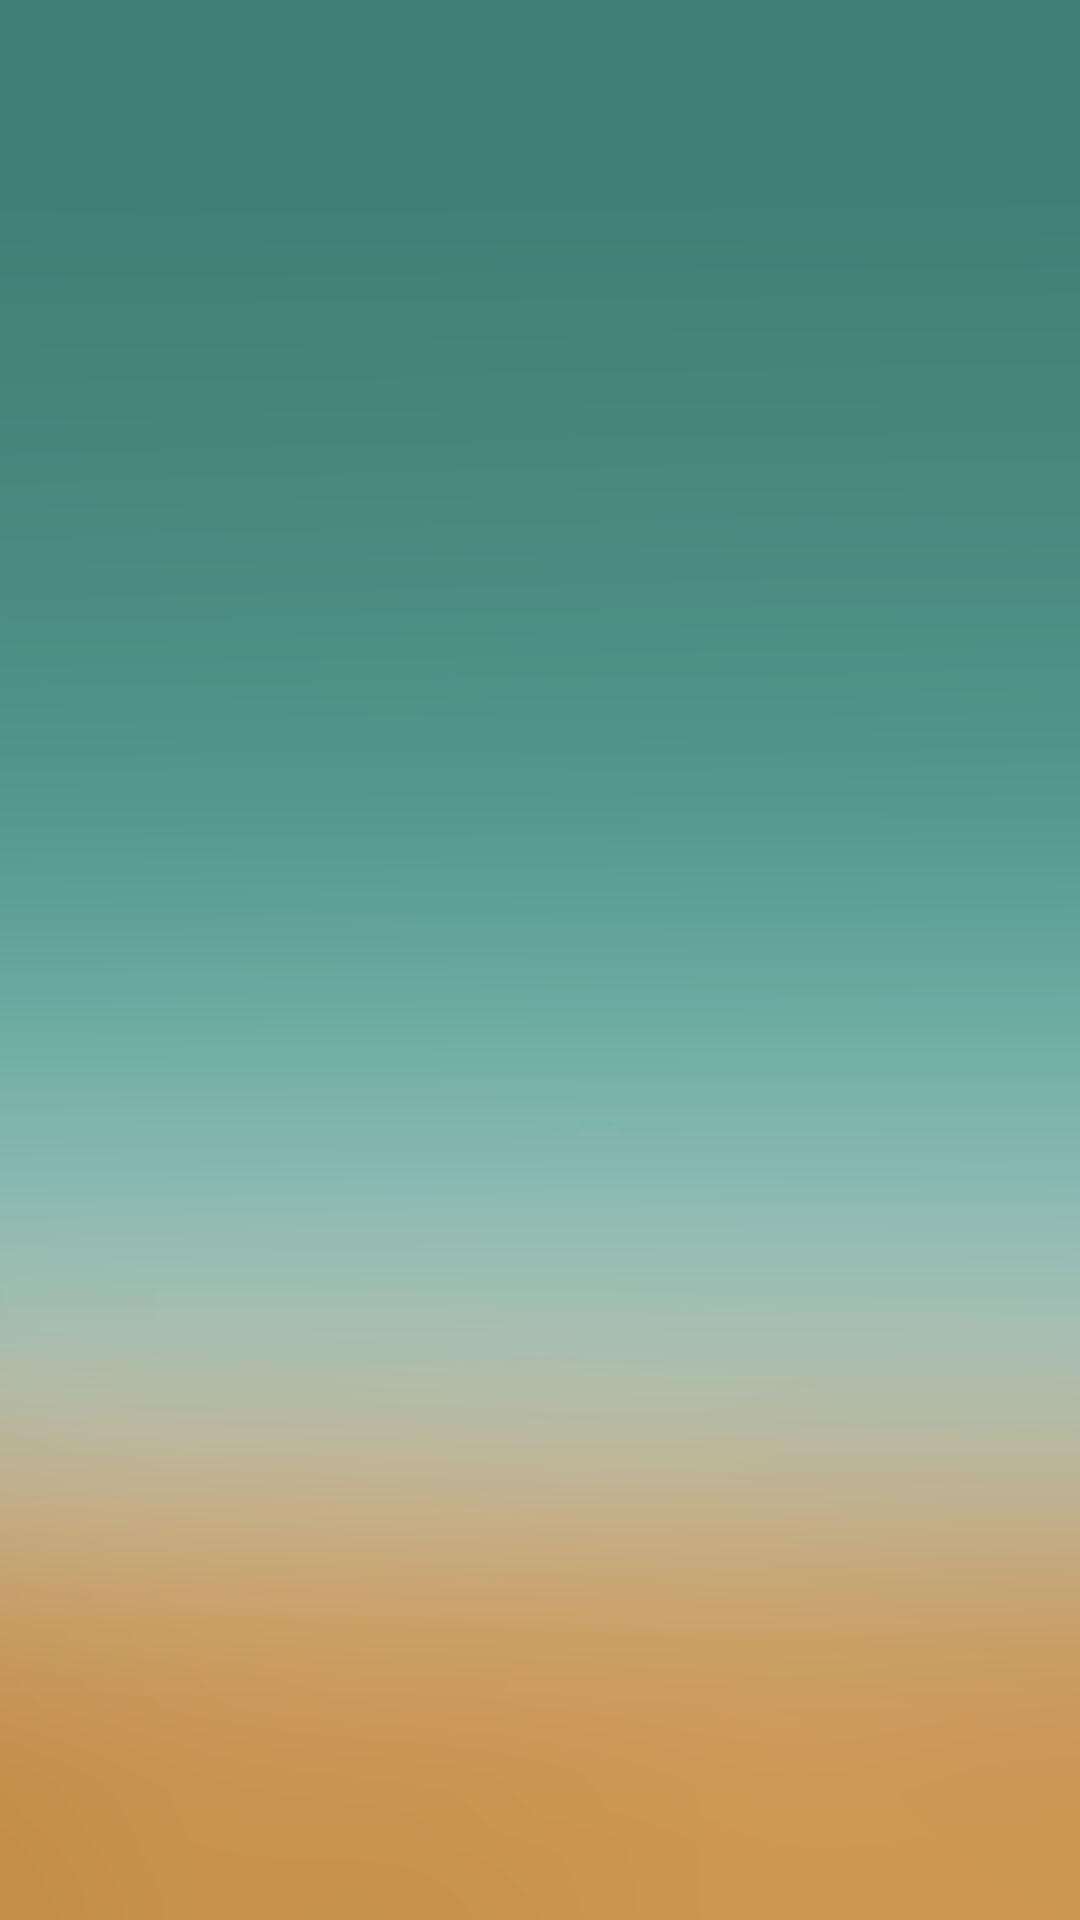 Blurred Beach Sand Sky Android Wallpaper free download